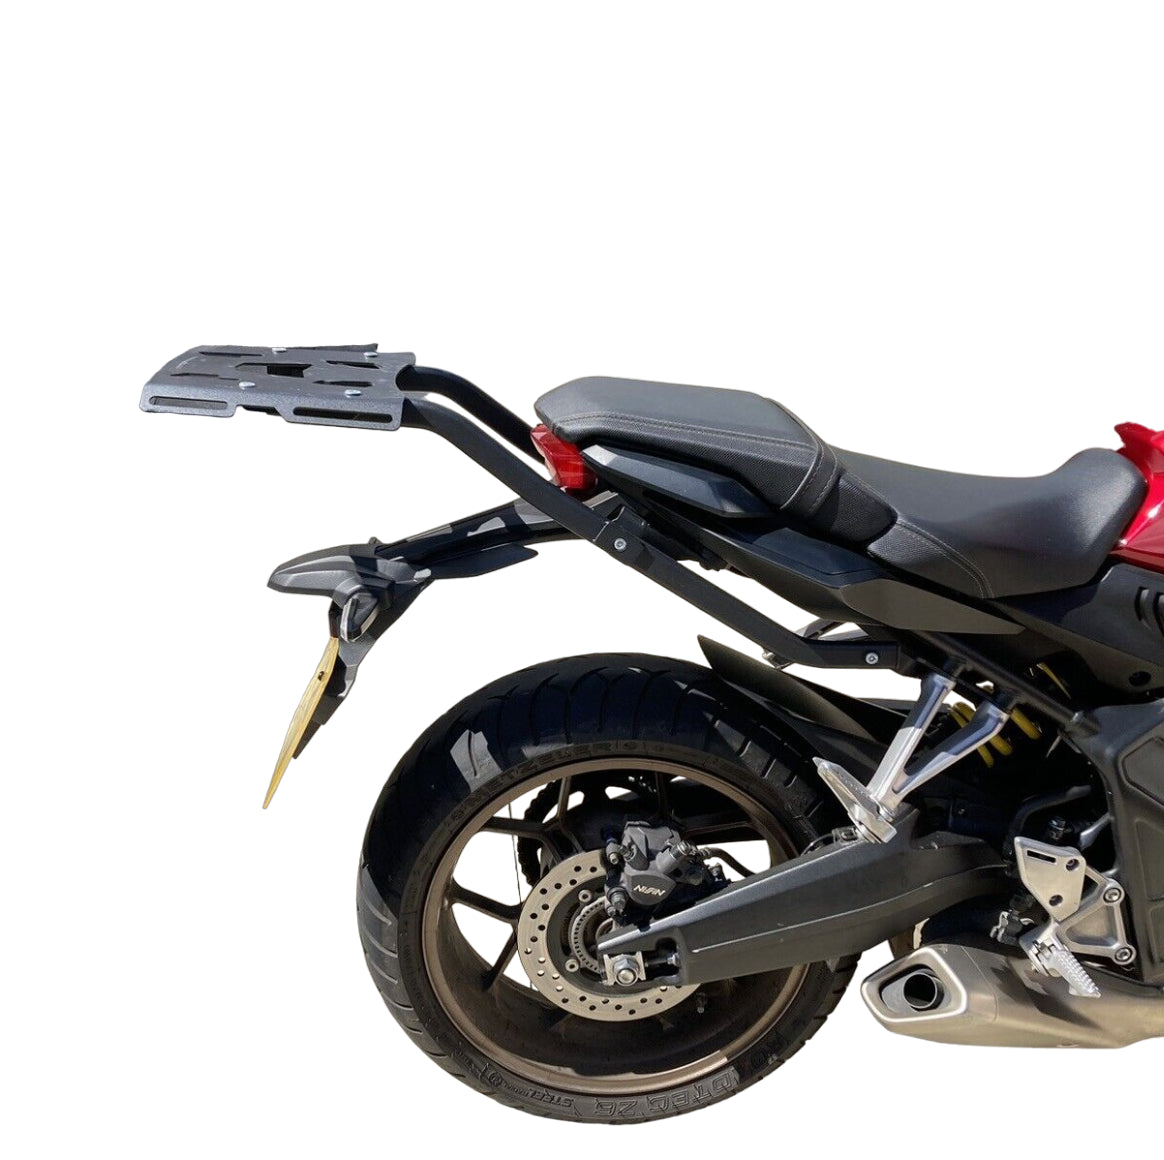 Honda CB650R rear rack with plate compatible 2019-20 only